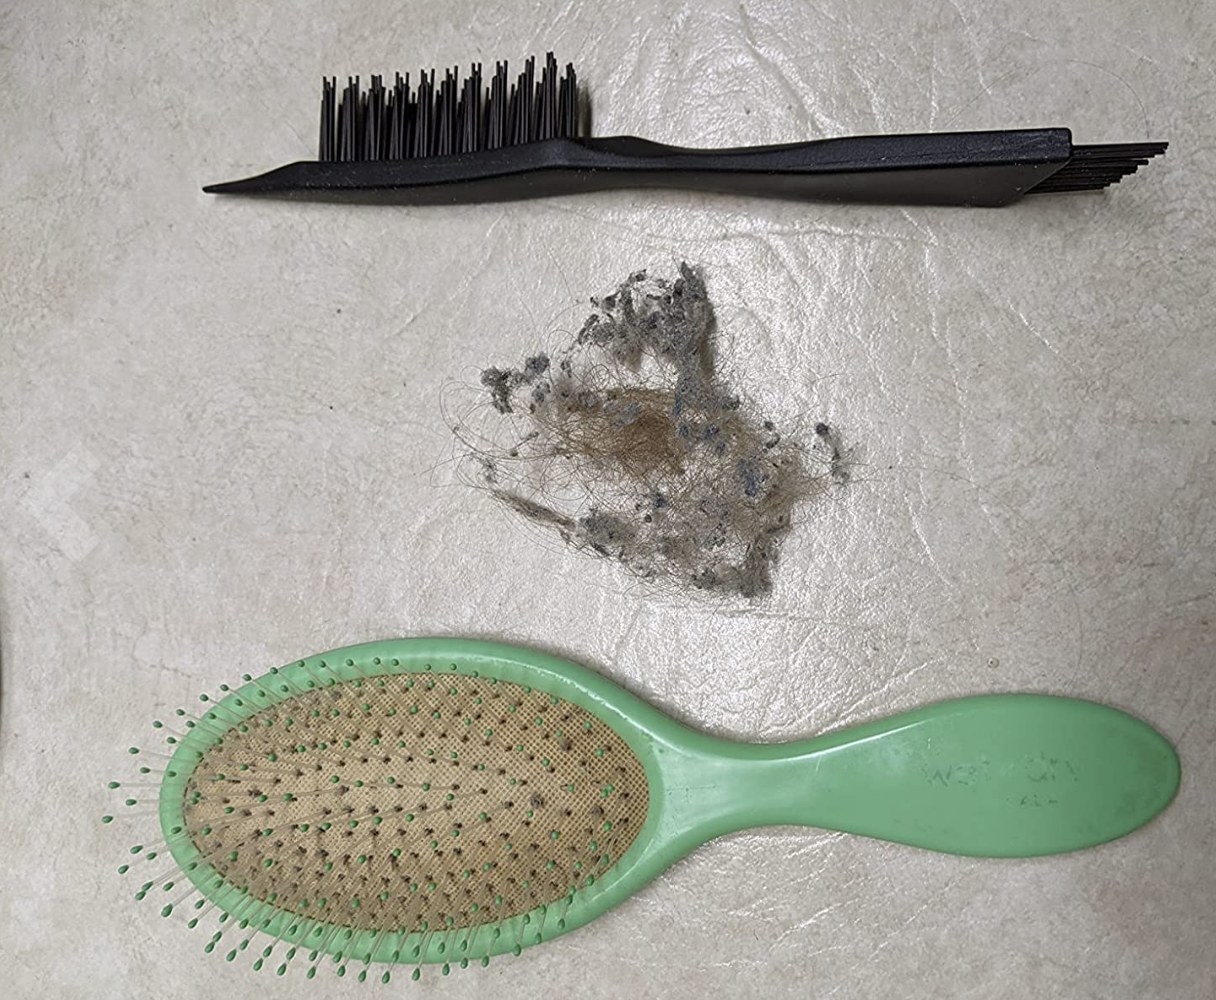 The product next to a hair ball and a green brush